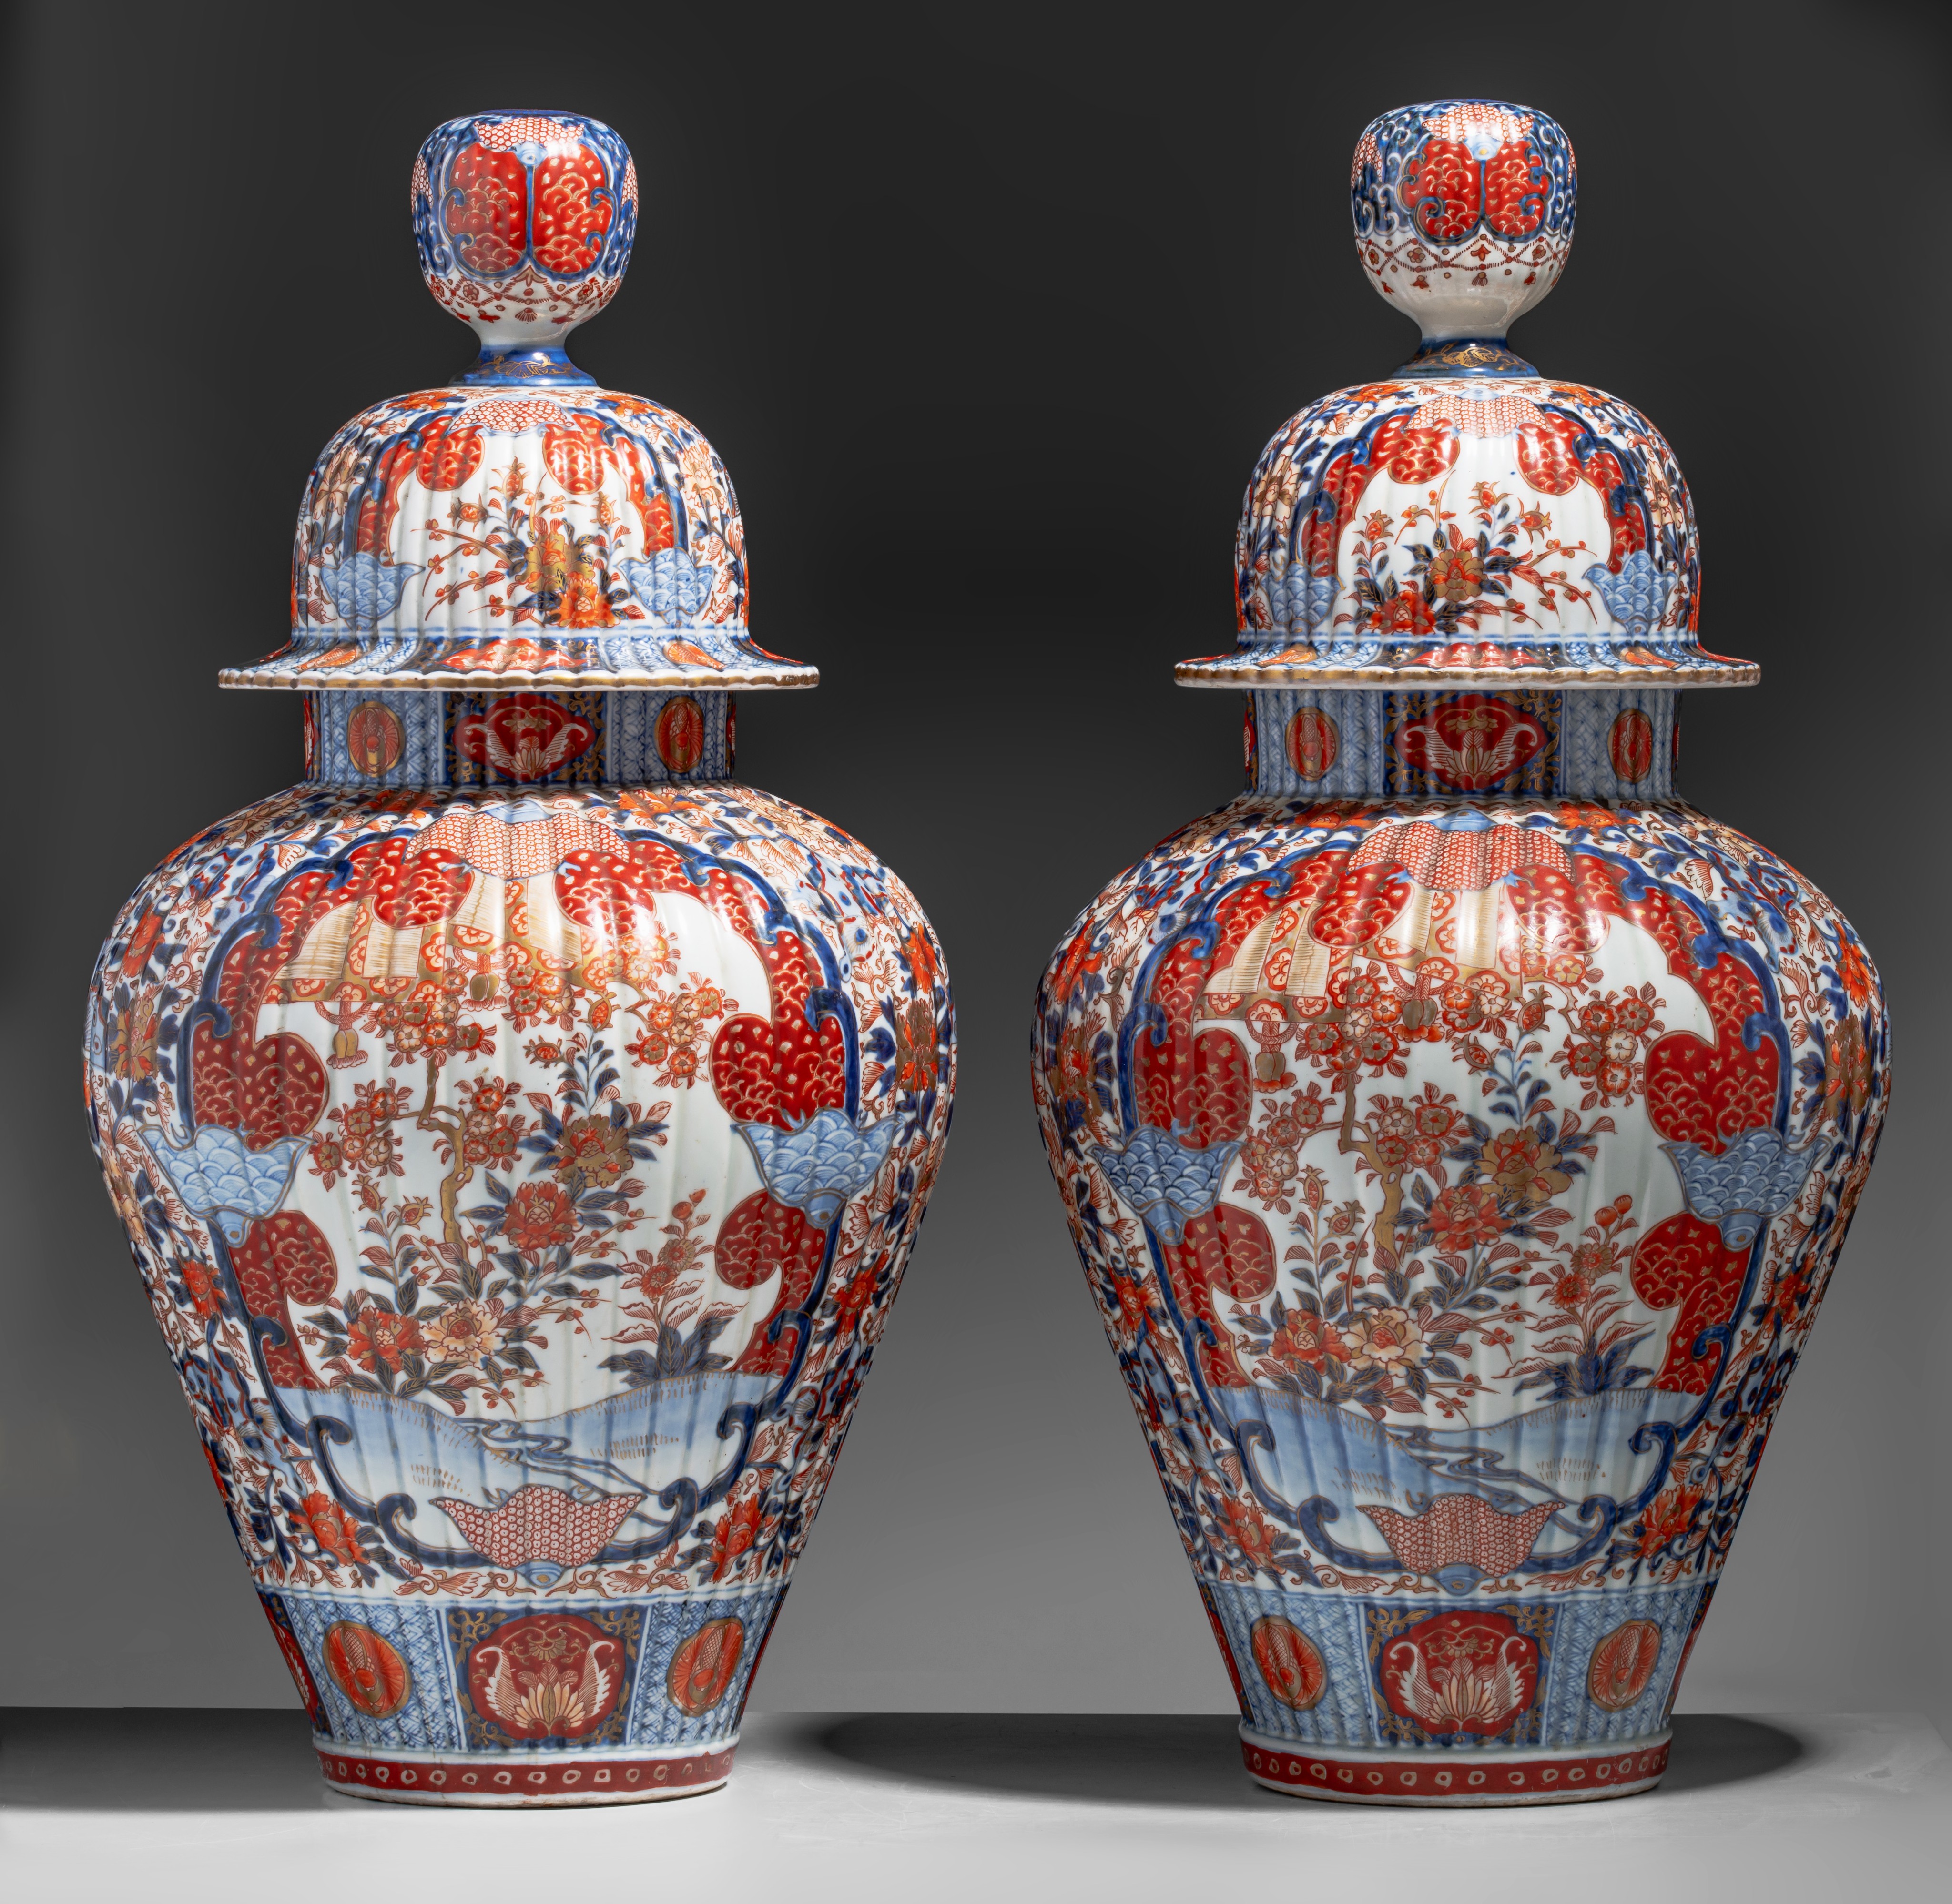 A pair of large Japanese Imari ribbed vases and covers, Edo period, late 18thC, H 69,5 cm - Image 2 of 9